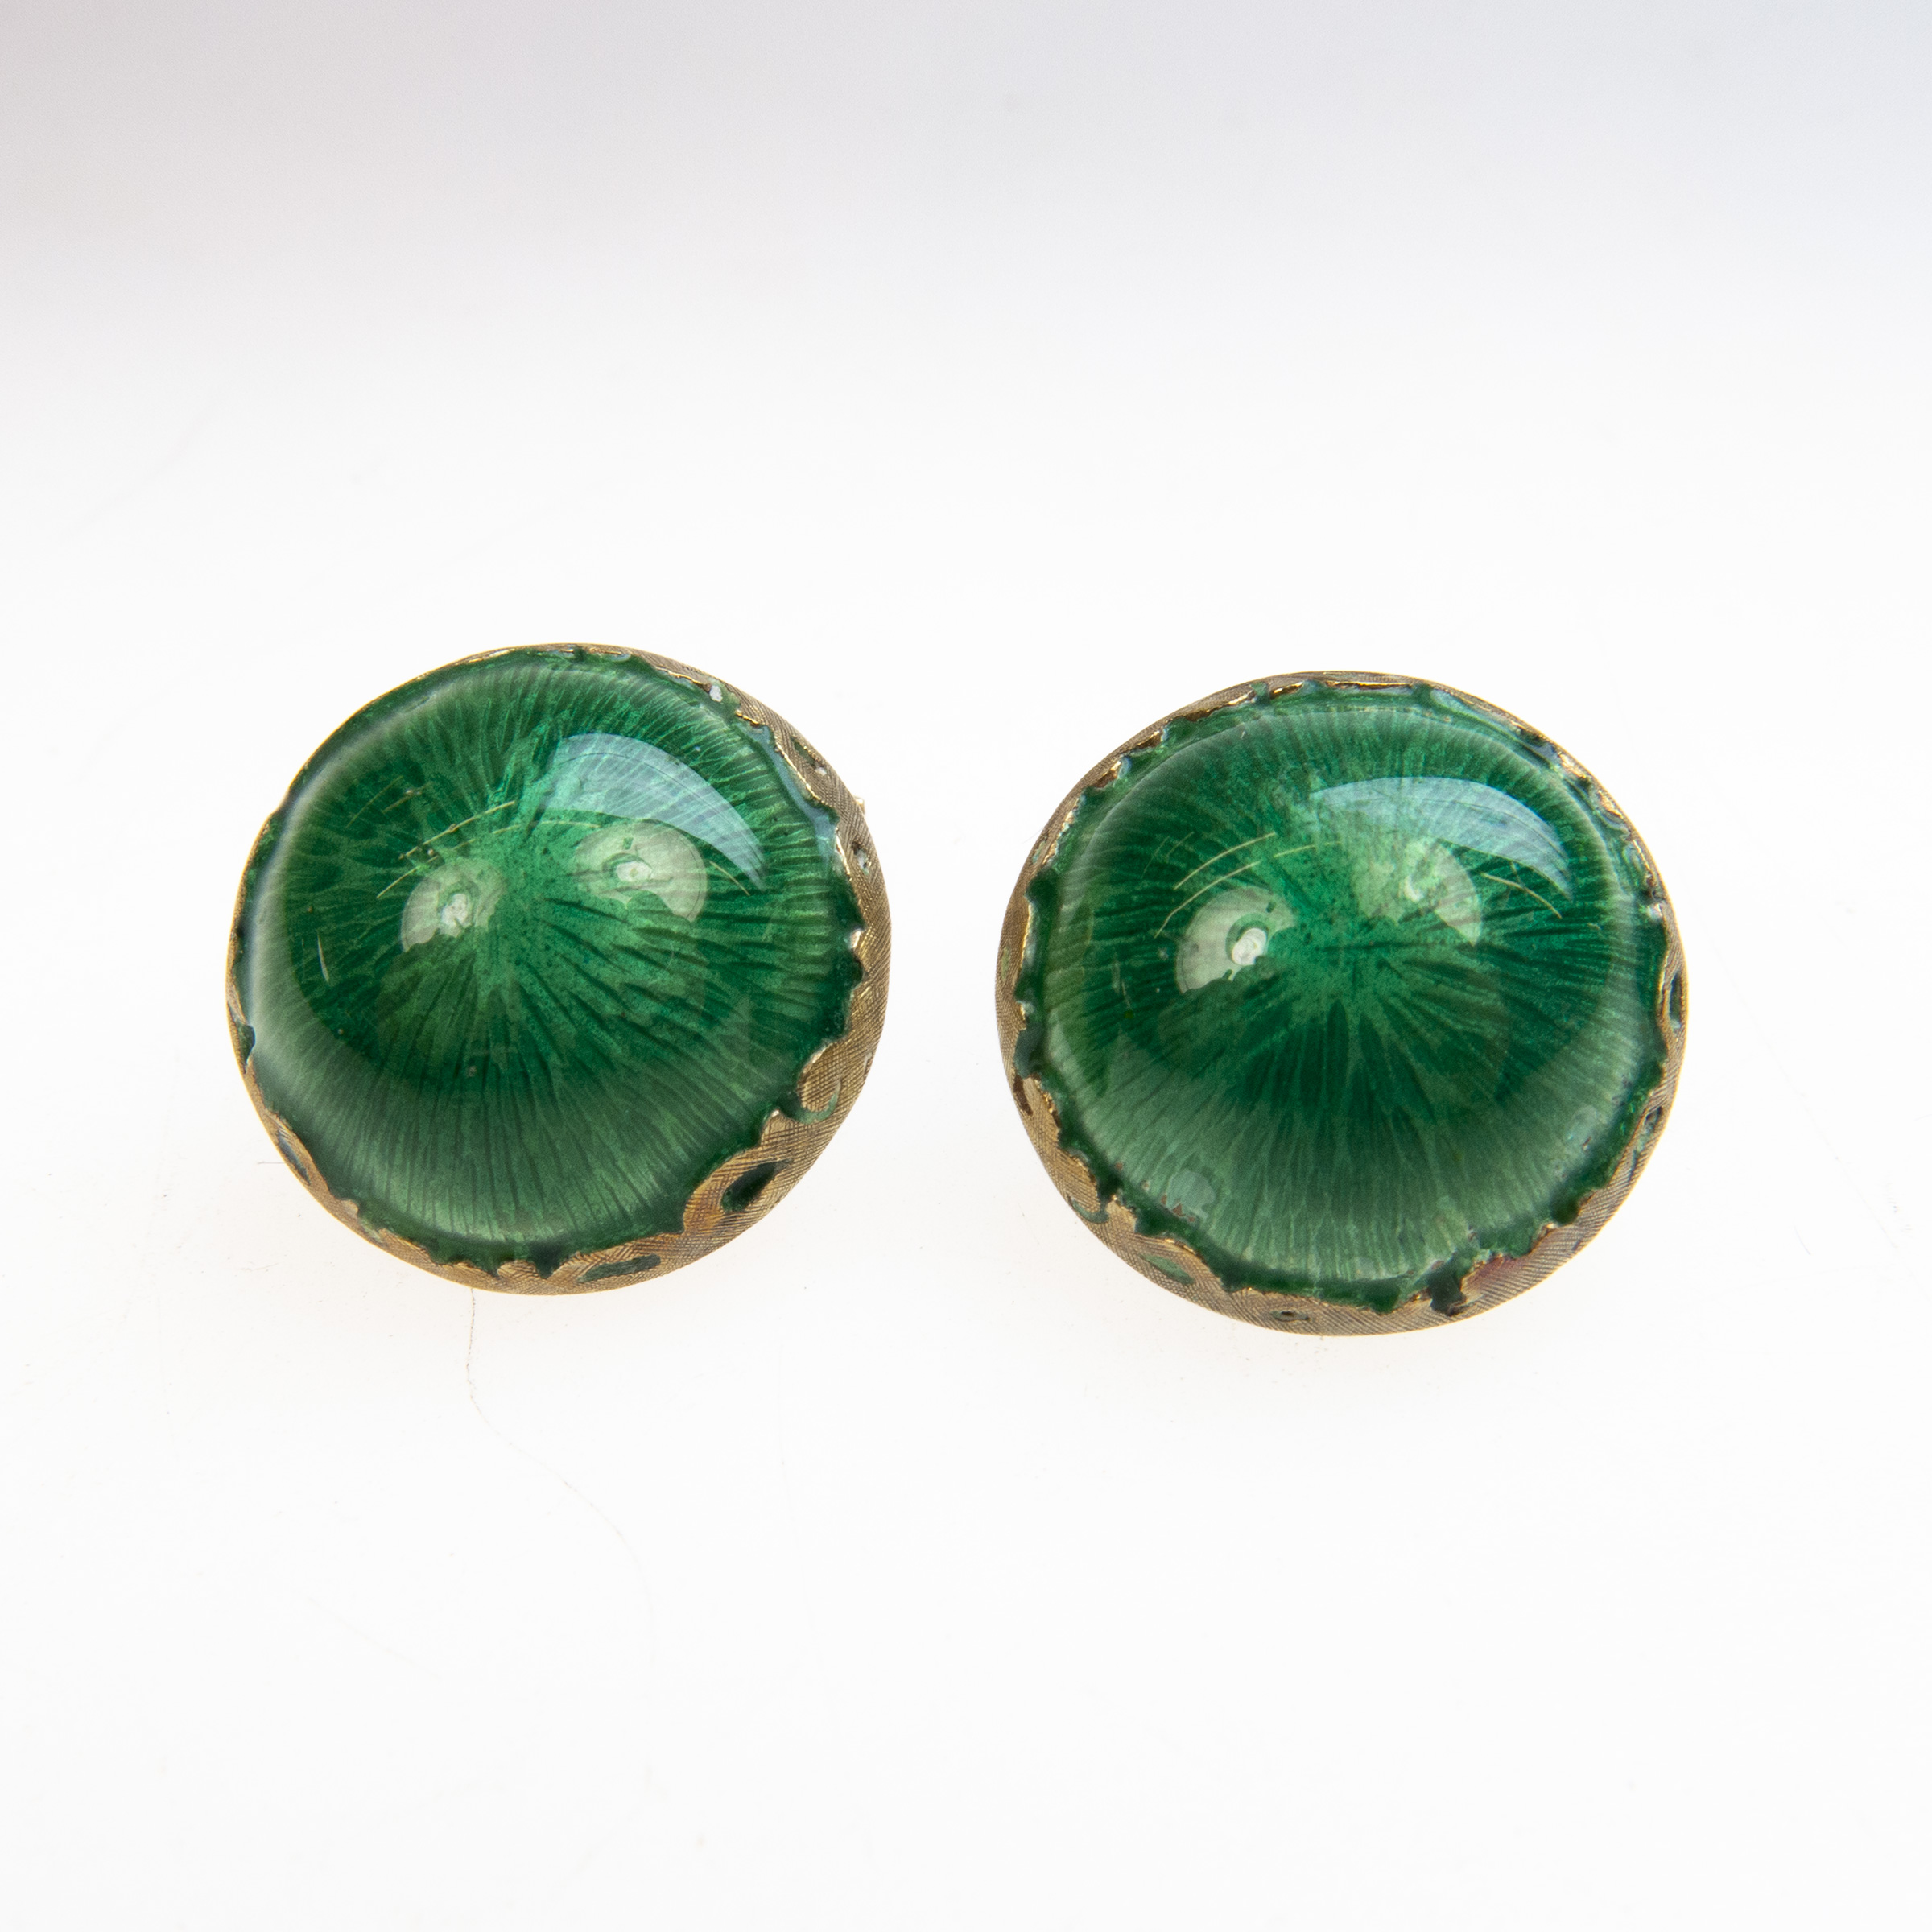 Pair Of 14k Yellow Gold and Green Enamel Cufflinks